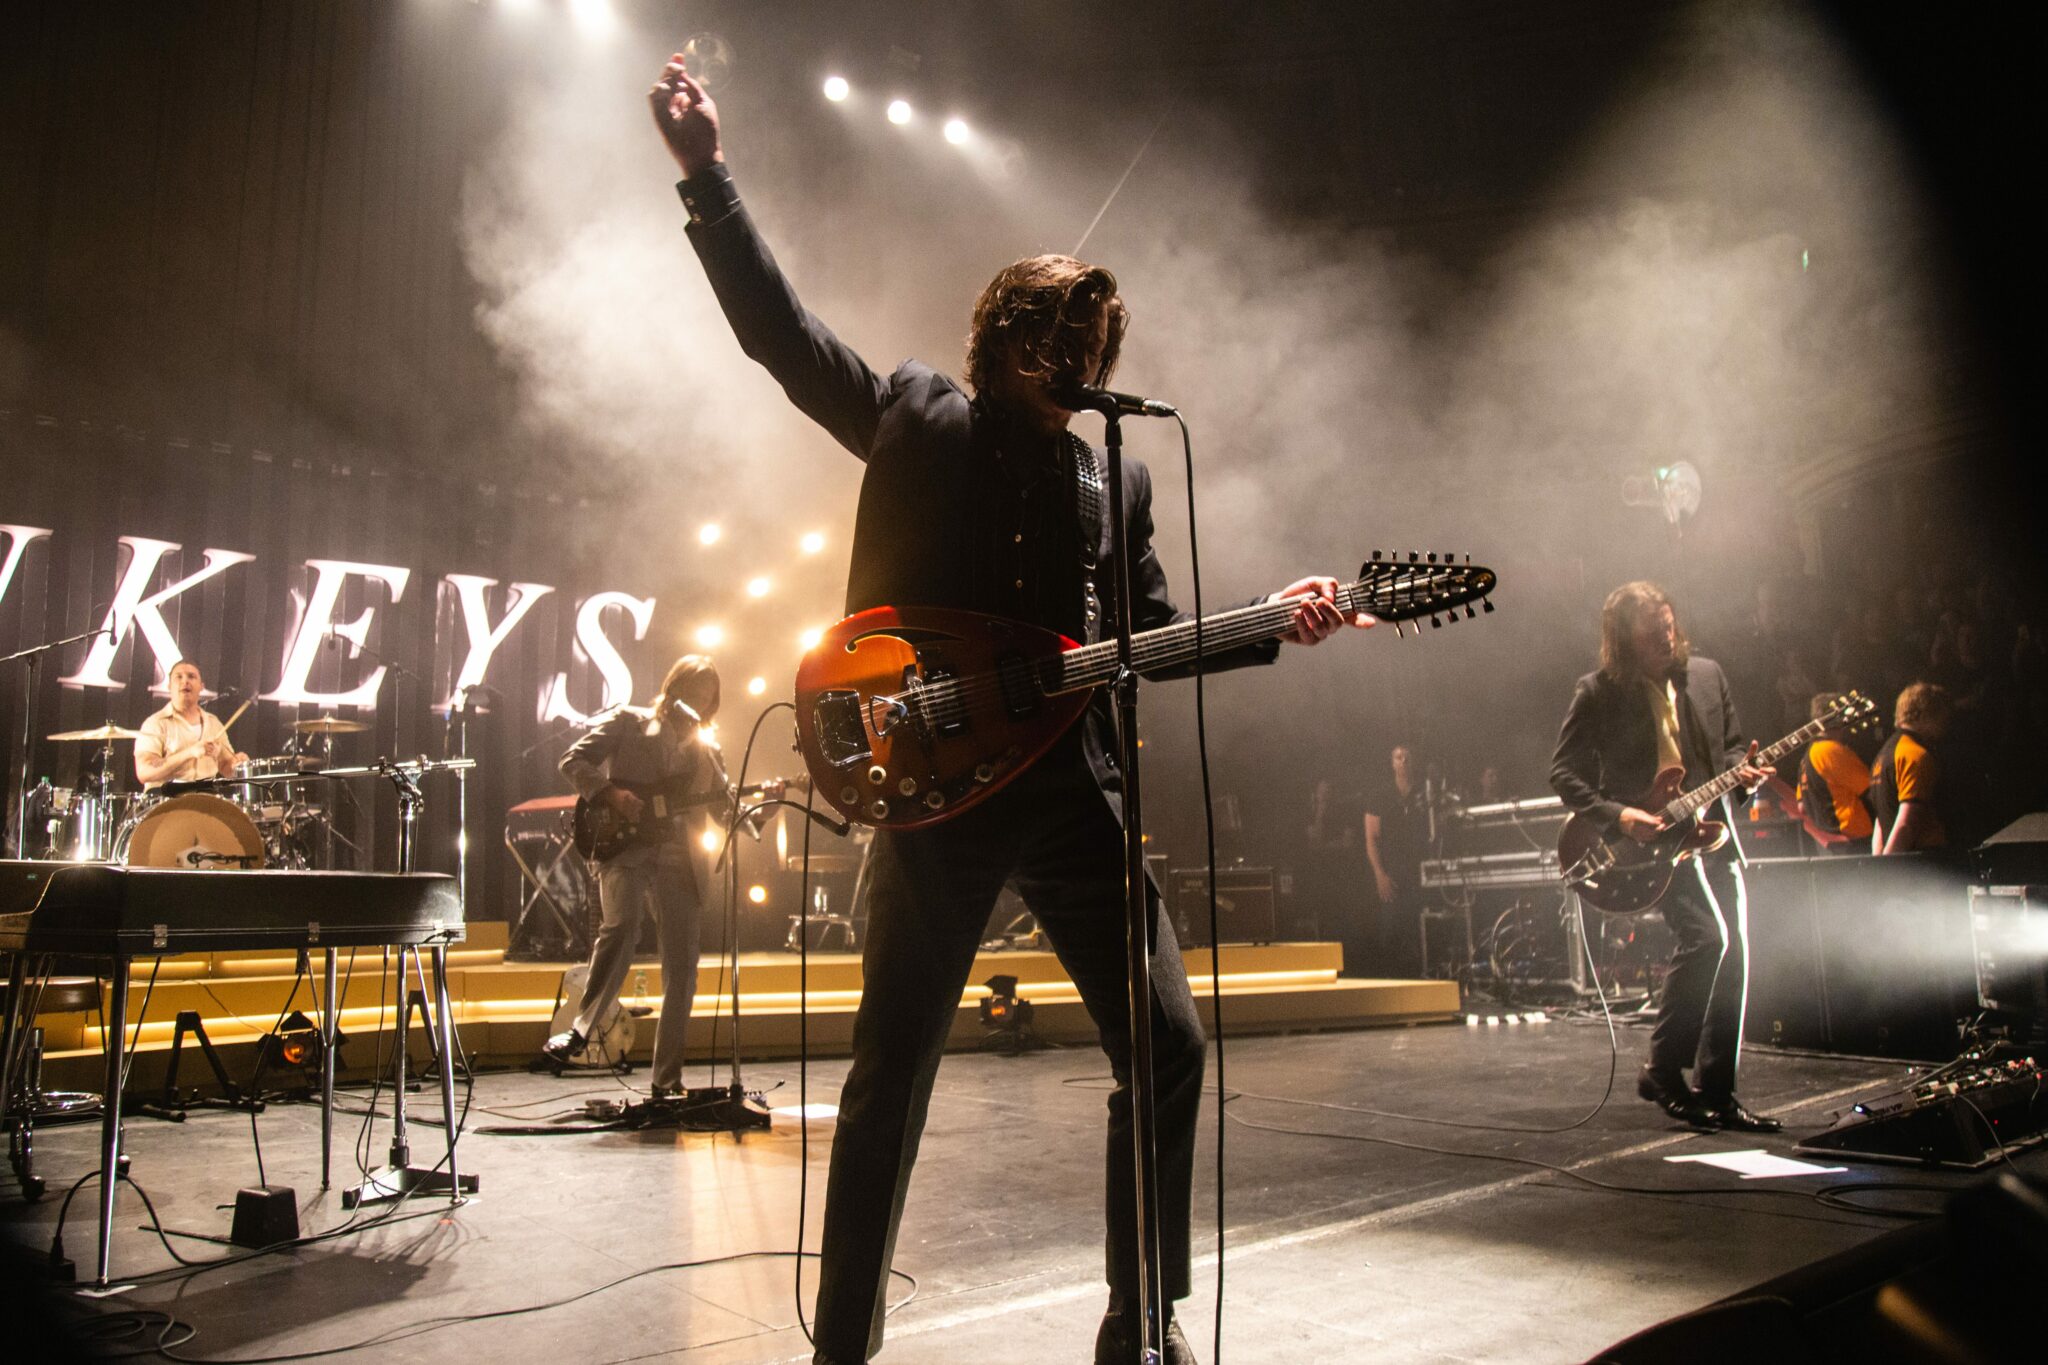 The Arctic monkeys performing on stage with Alex Turner in the centre of a smokey stage